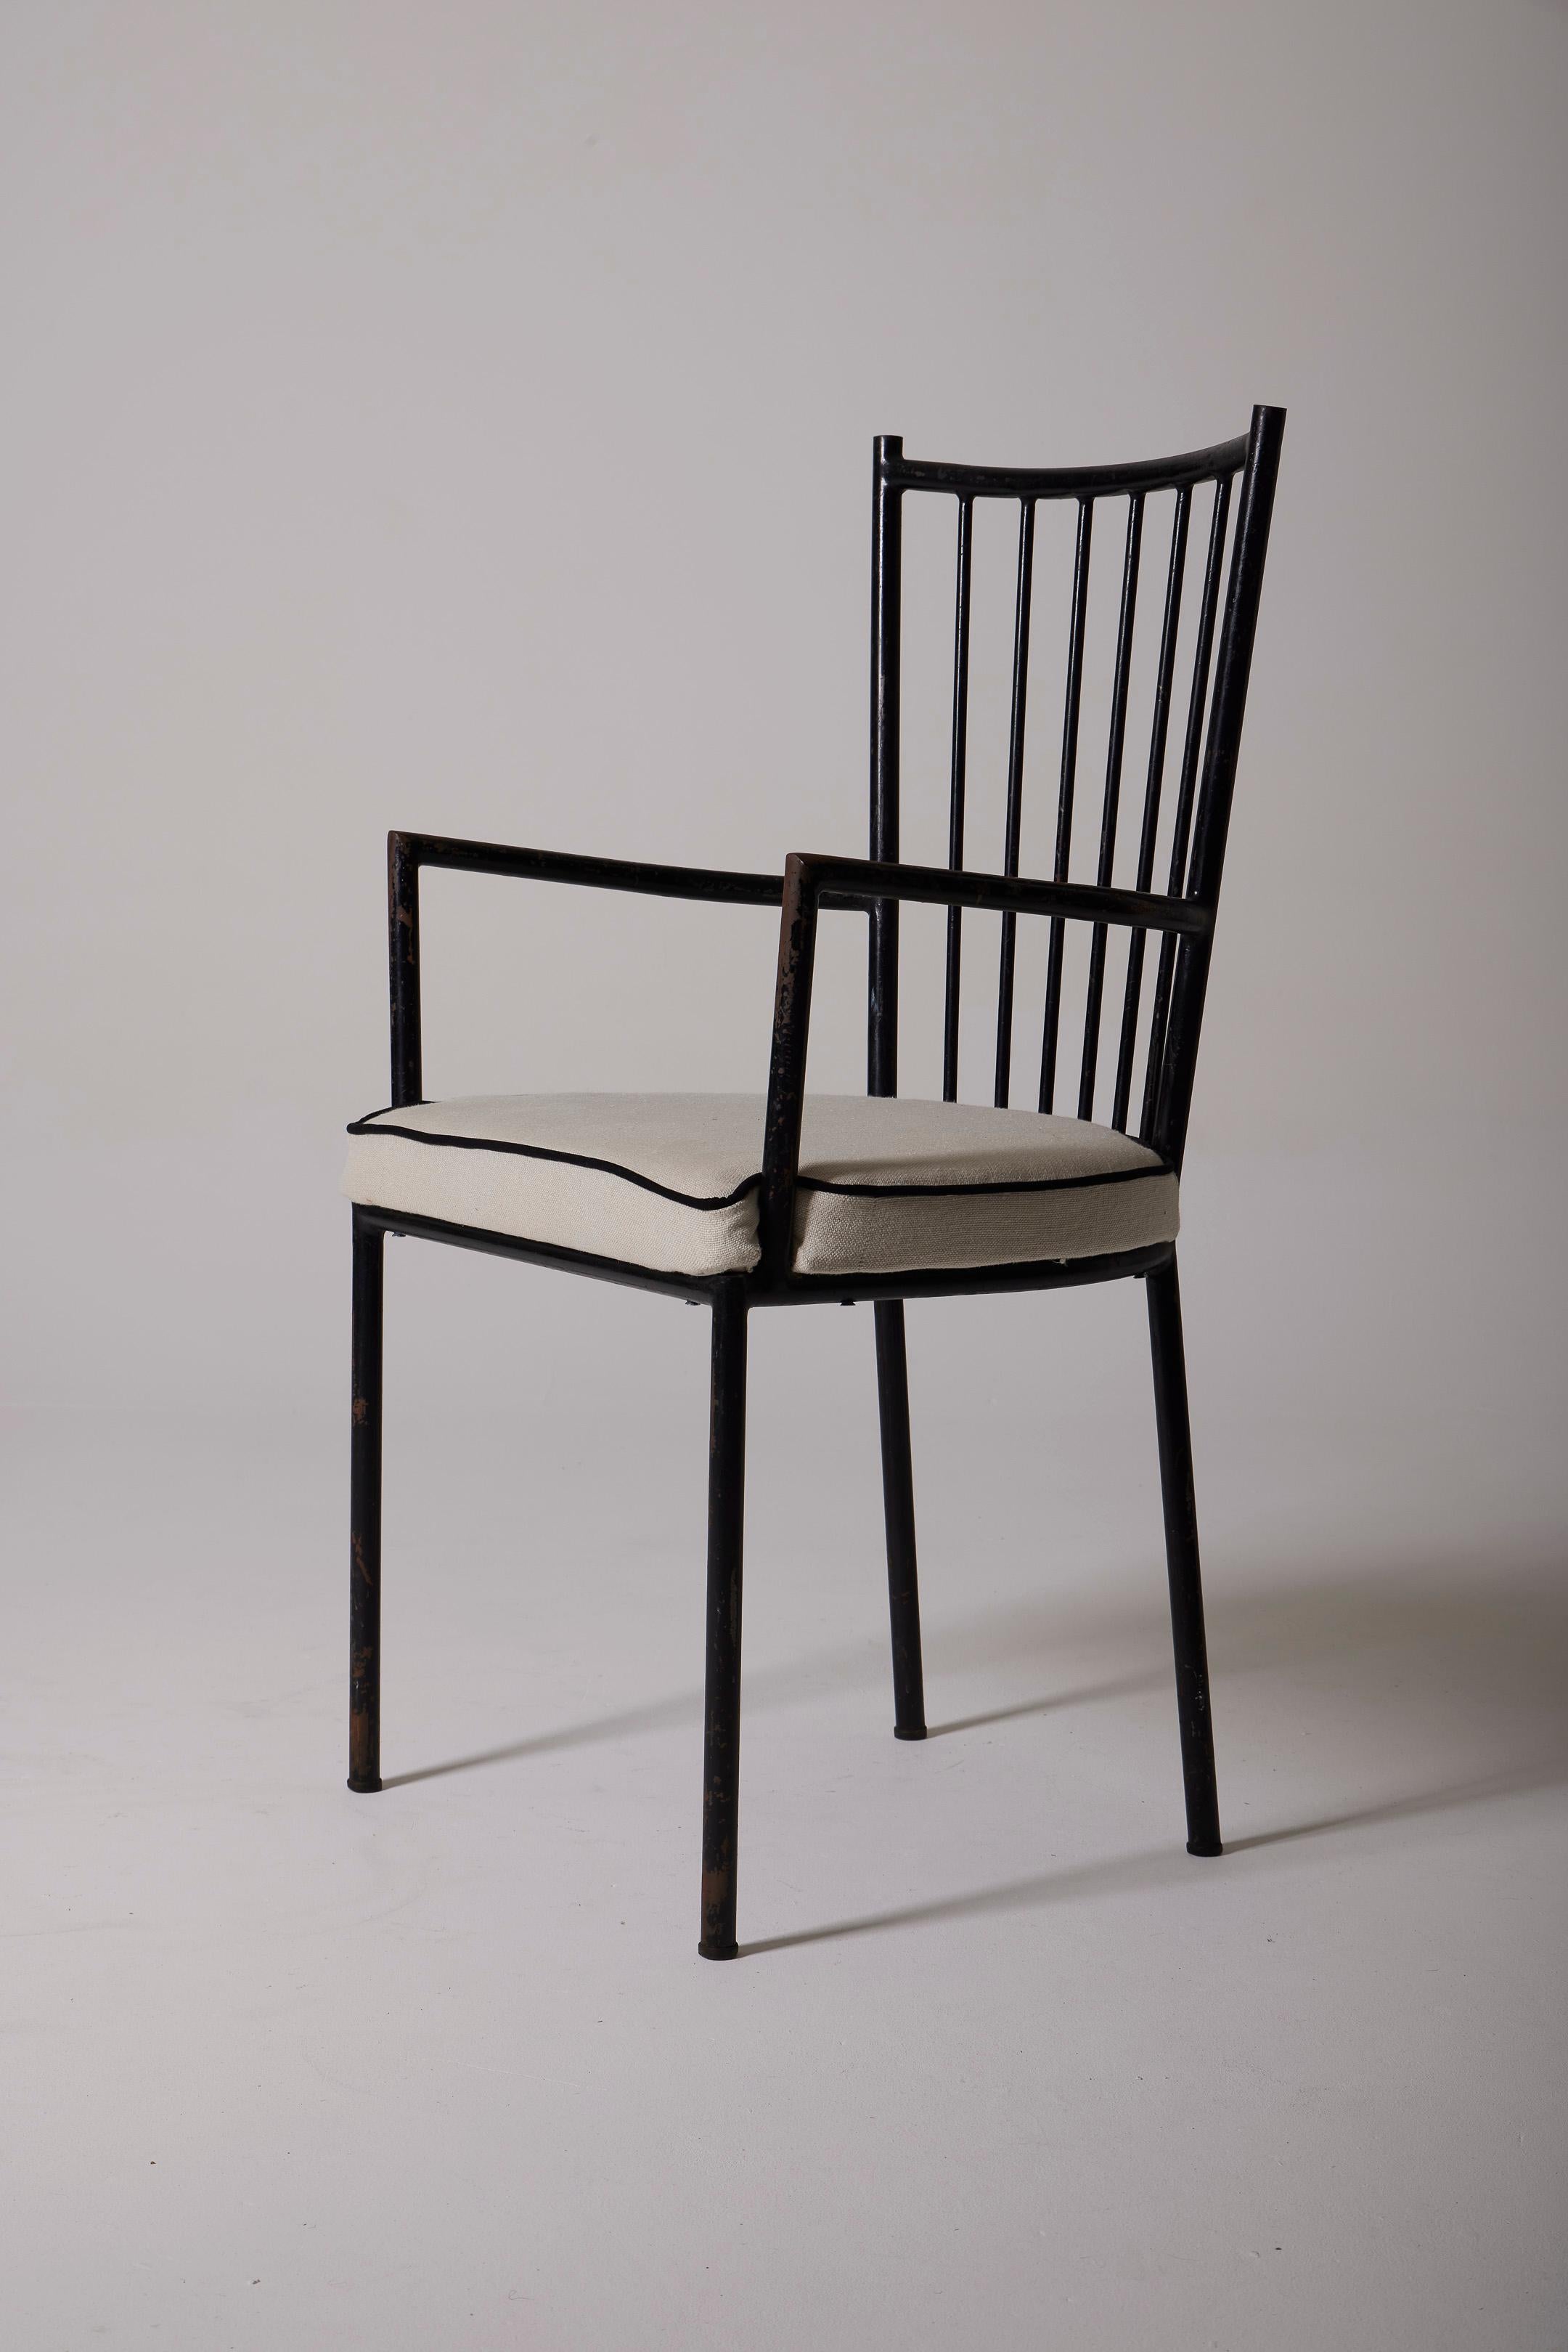 Armchair by designer Colette Gueden (1905-2000) for Primavera in the 1950s (1954). The frame is in black lacquered metal and the seat is in white fabric. Signs of wear on the metal parts are to be noted (visible in the photos). Colette Gueden was a